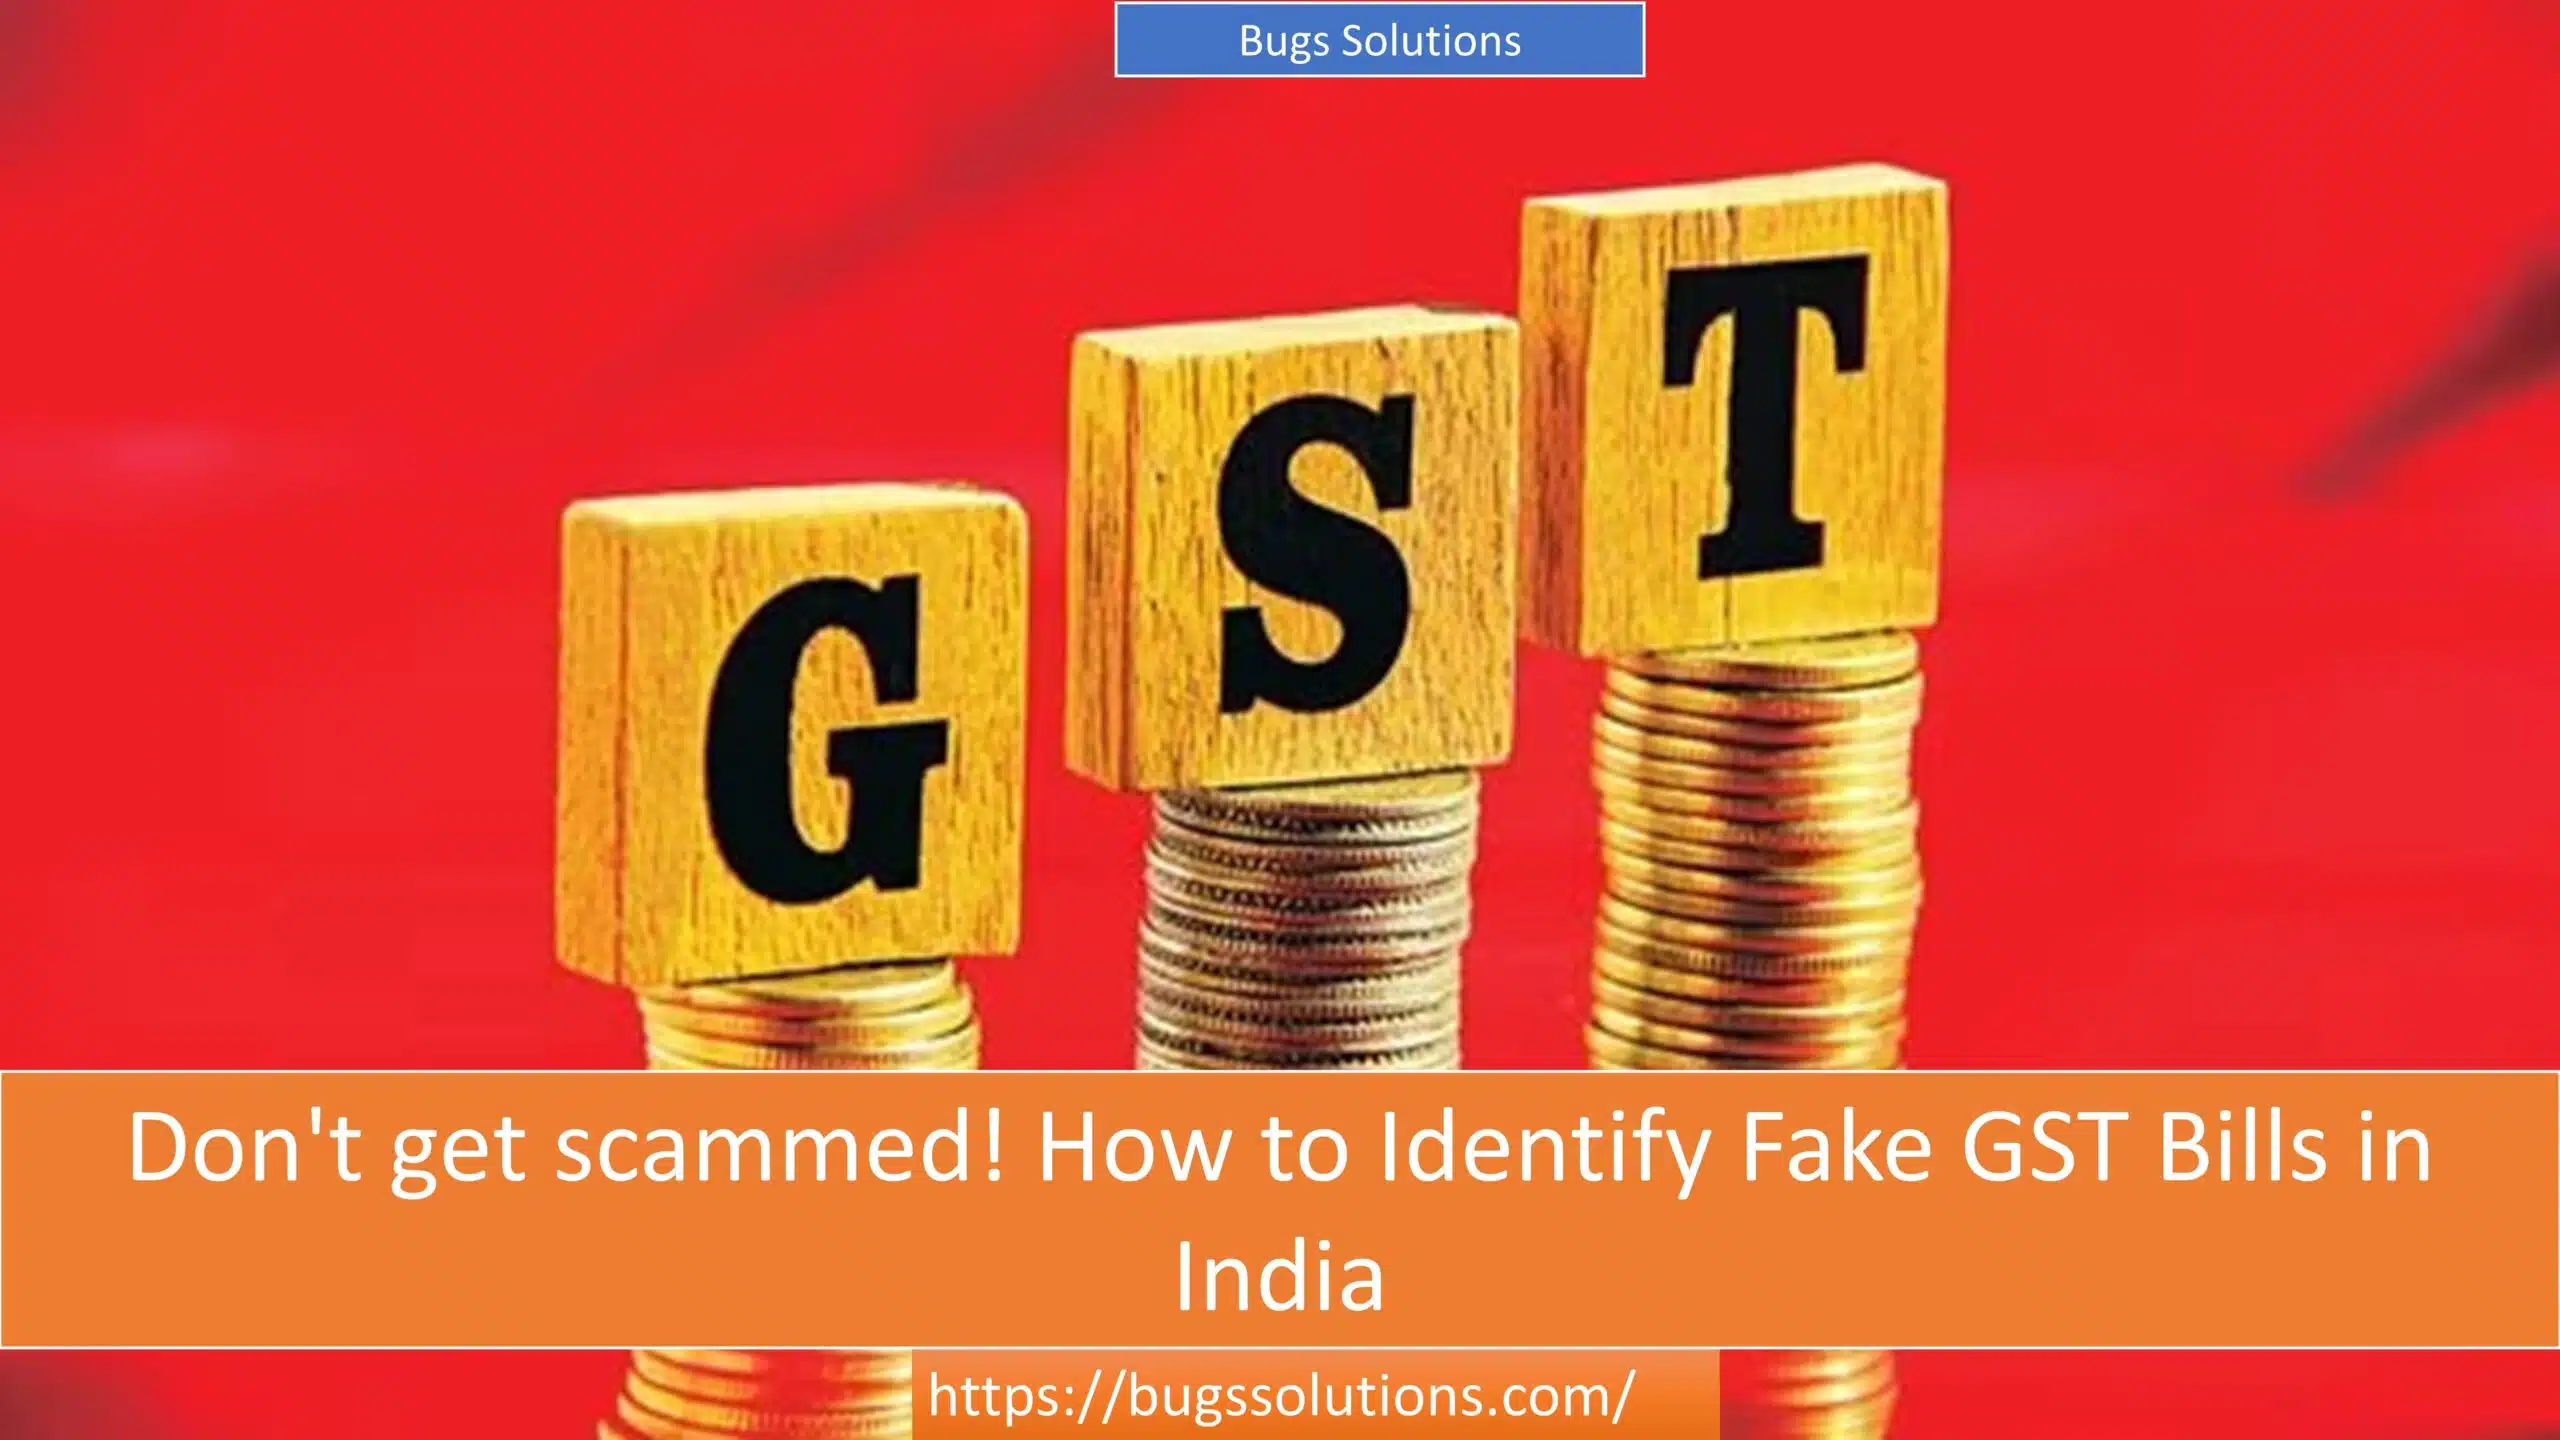 Don't get scammed! How to Identify Fake GST Bills in India